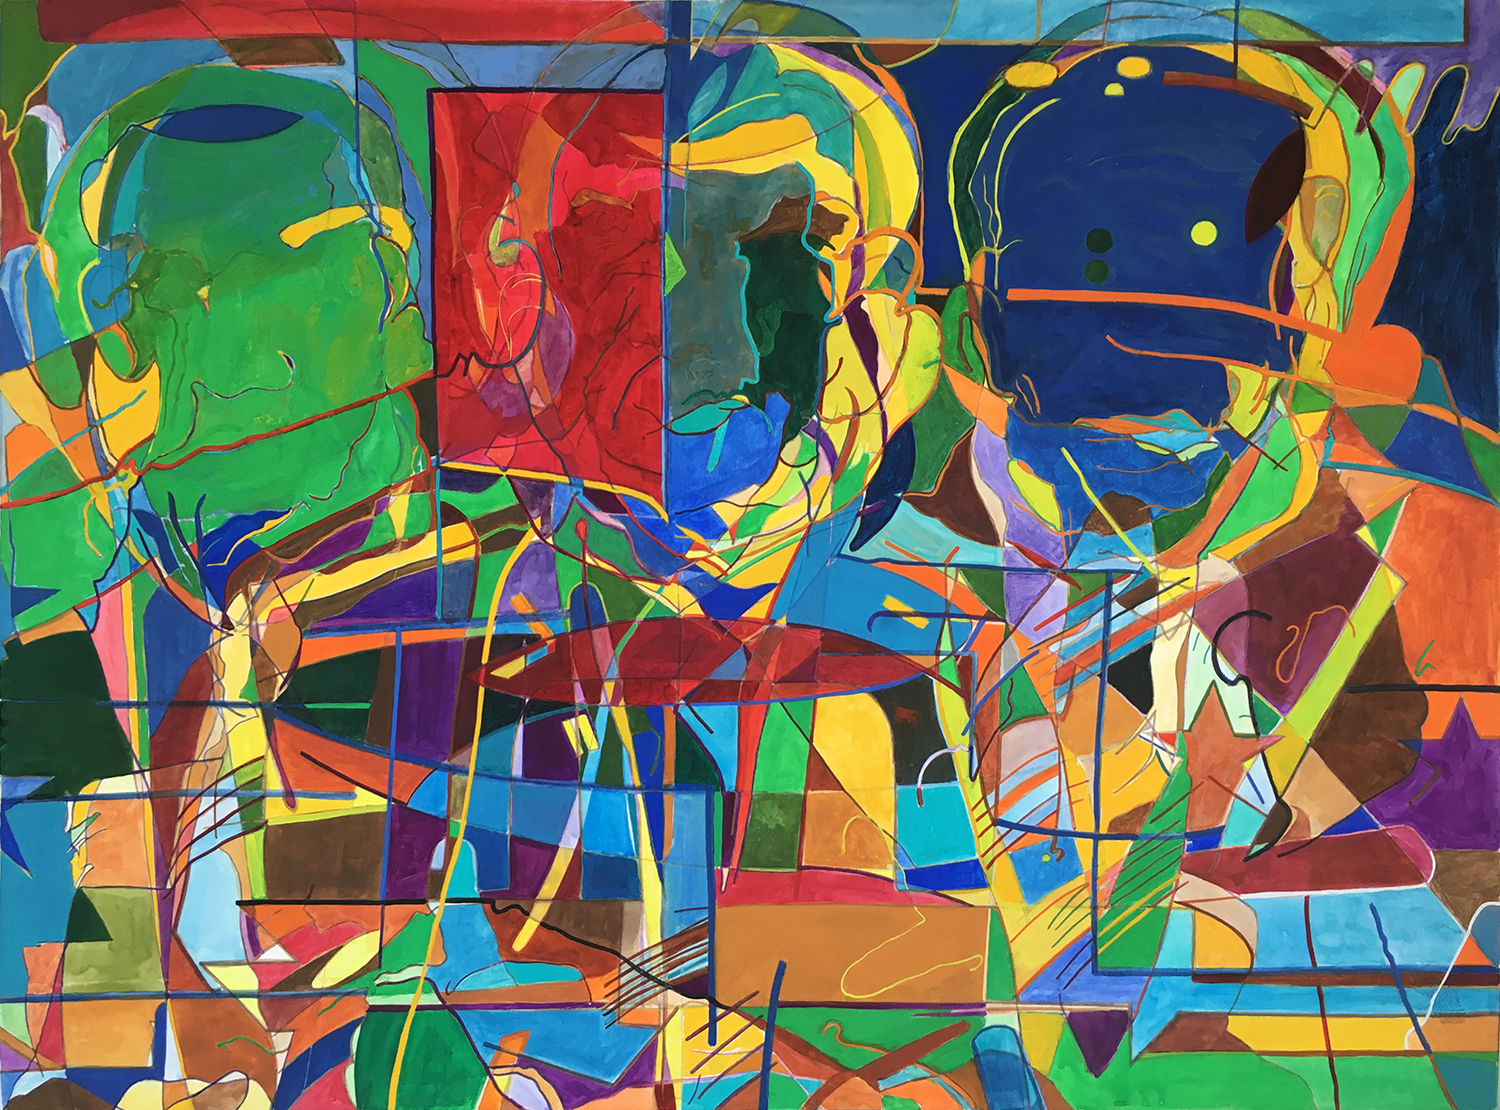 colorful abstract television landscape painting from live broadcast of second presidential debate between Barack Obama and John McCain in 2008